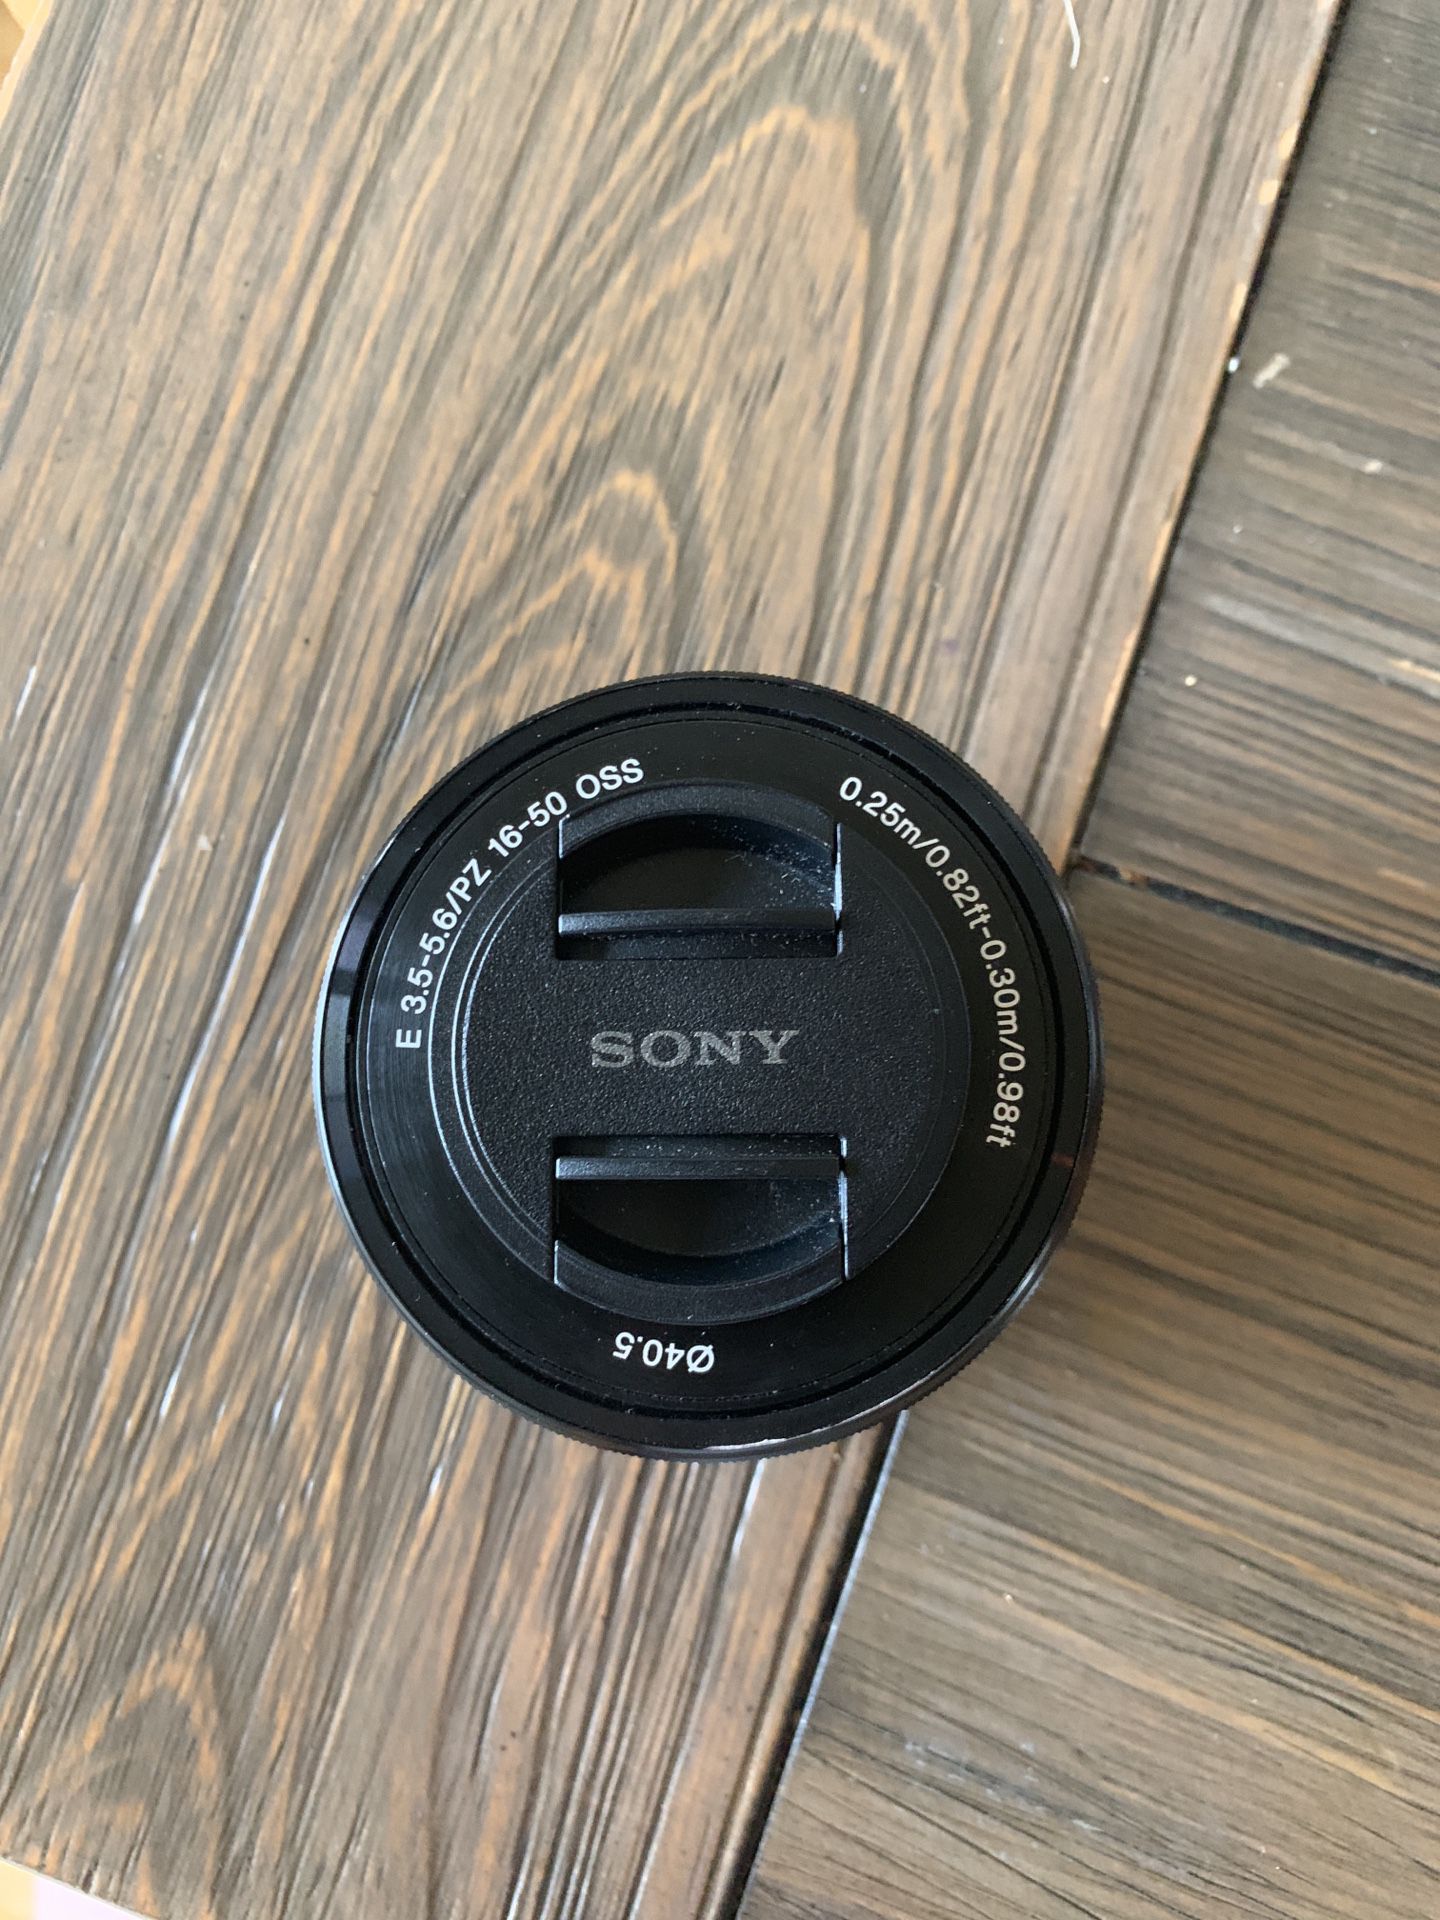 Sony E mount Lens 16-50 OSS 3.5-5.6 ... glass is clean, lens works great. Have a full frame camera with no use for this lens. Thanks!